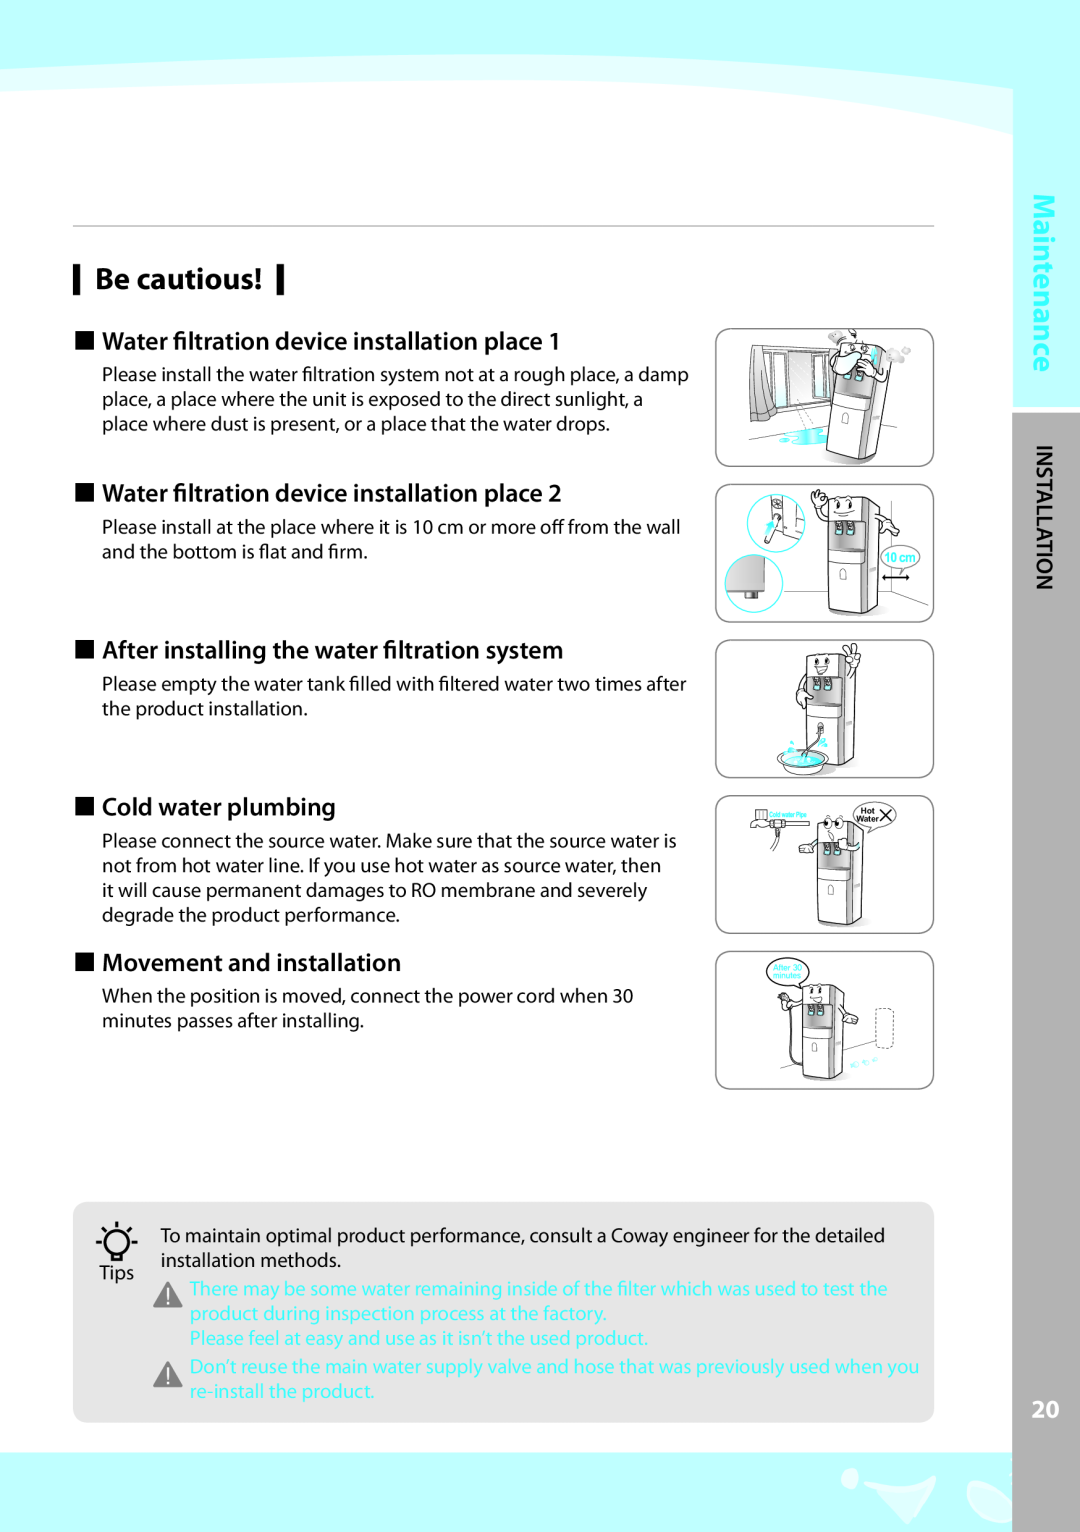 Coway CHP-04AL Be cautious,  Water filtration device installation place,  After installing the water filtration system 